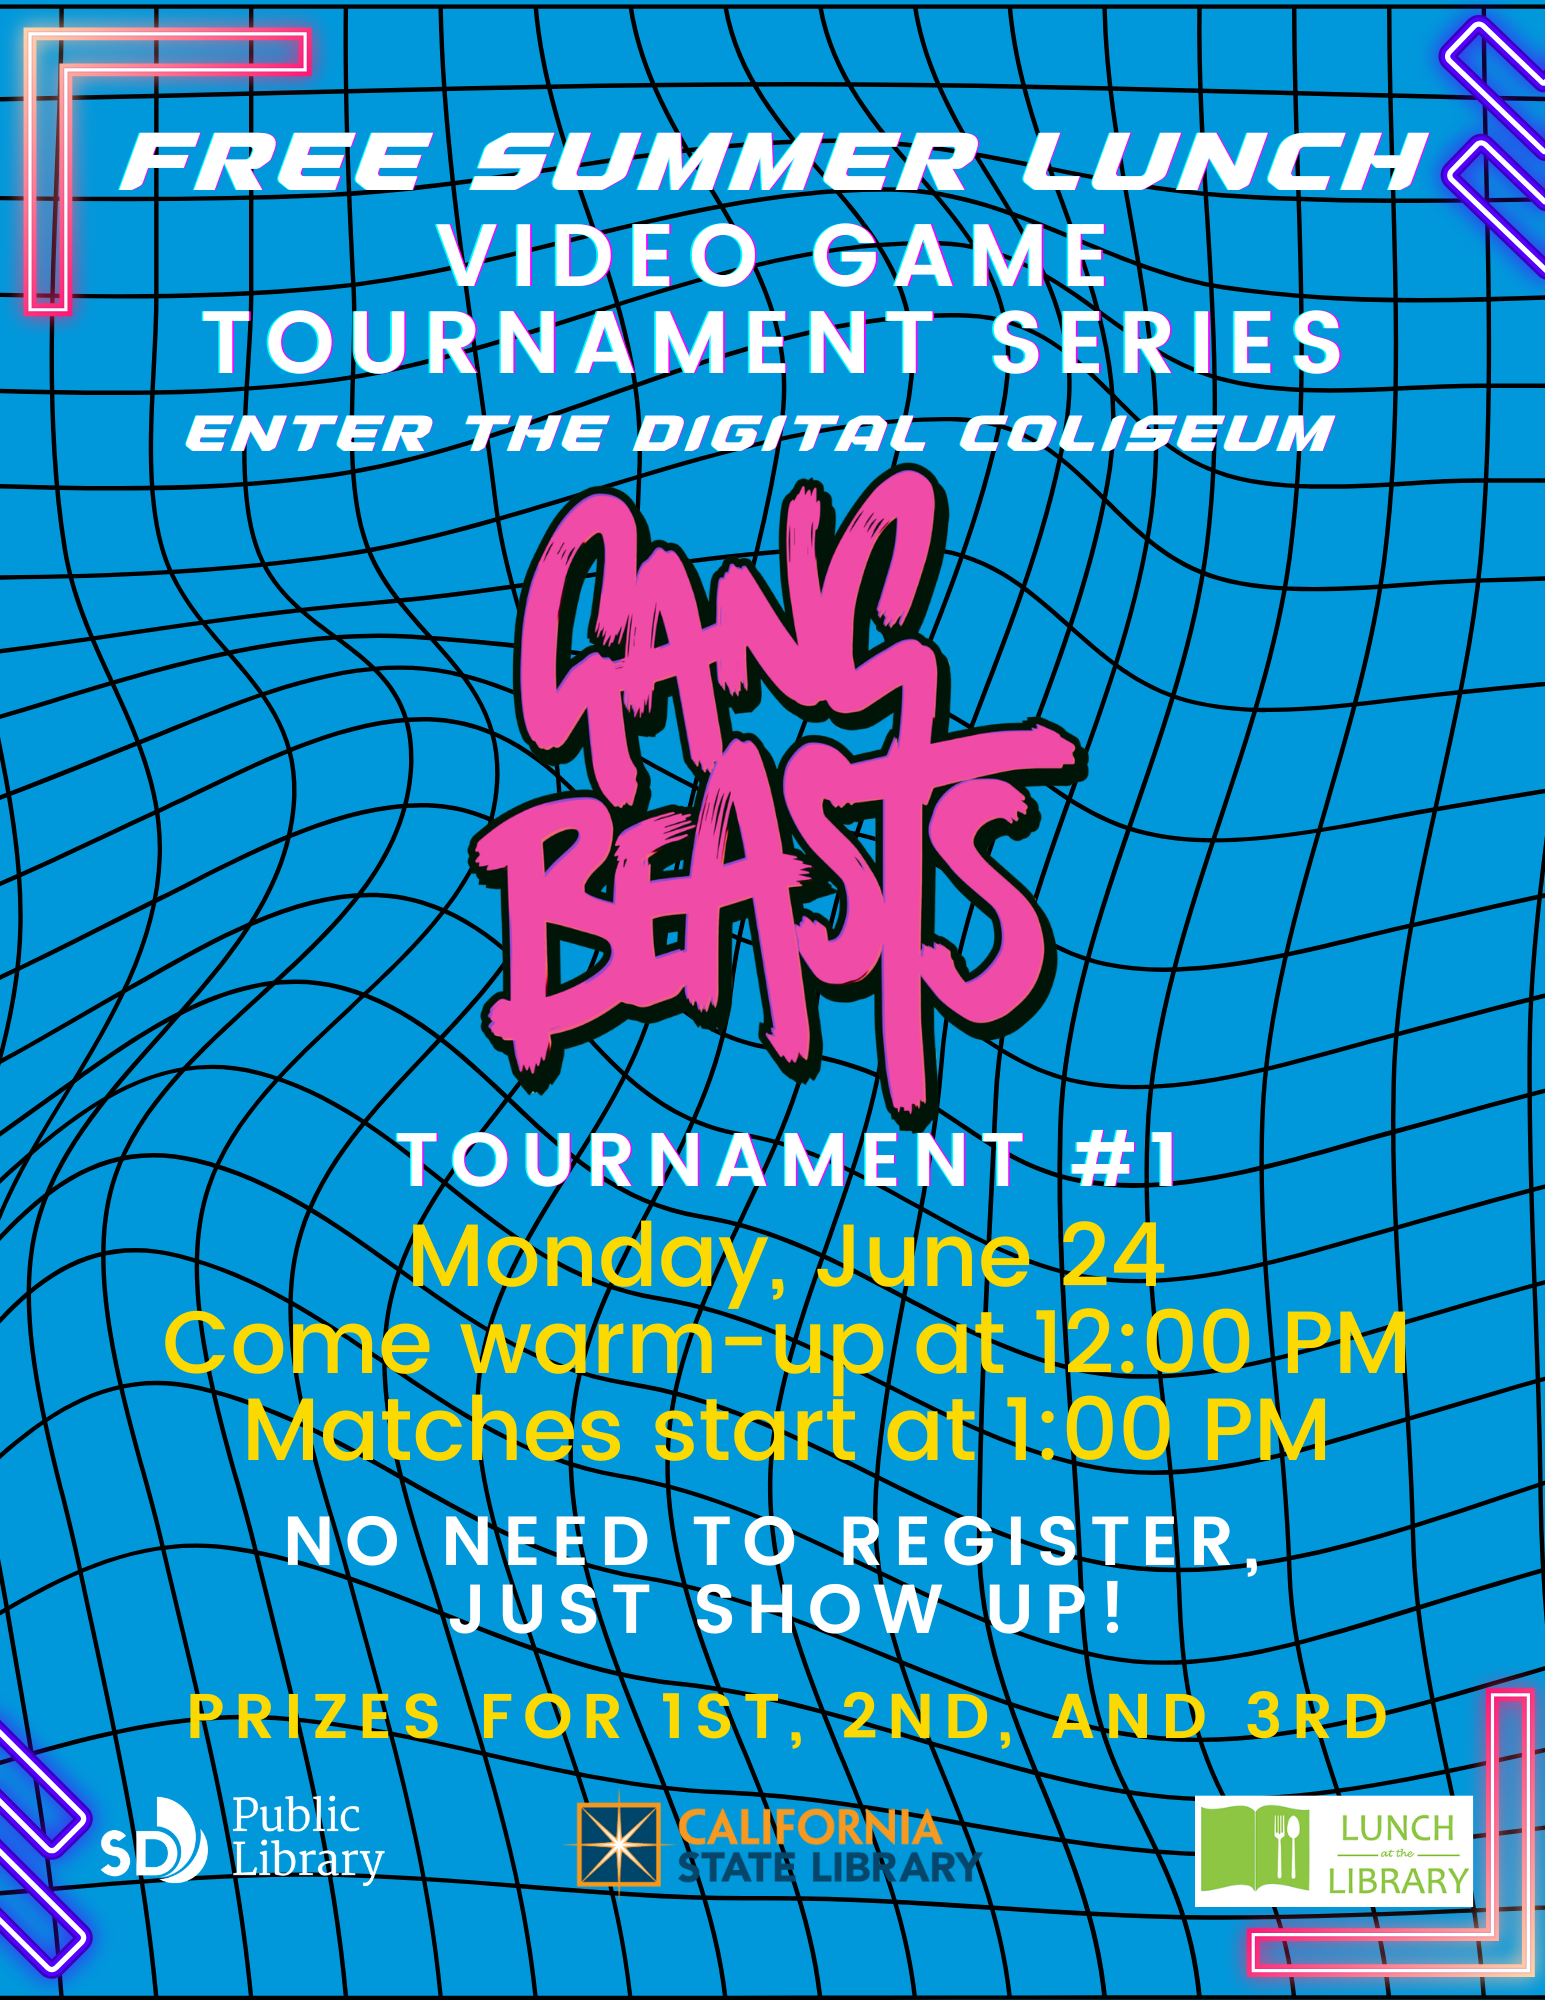 Free Summer Lunch Video Game Tournament #1: Gang Beasts flyer.